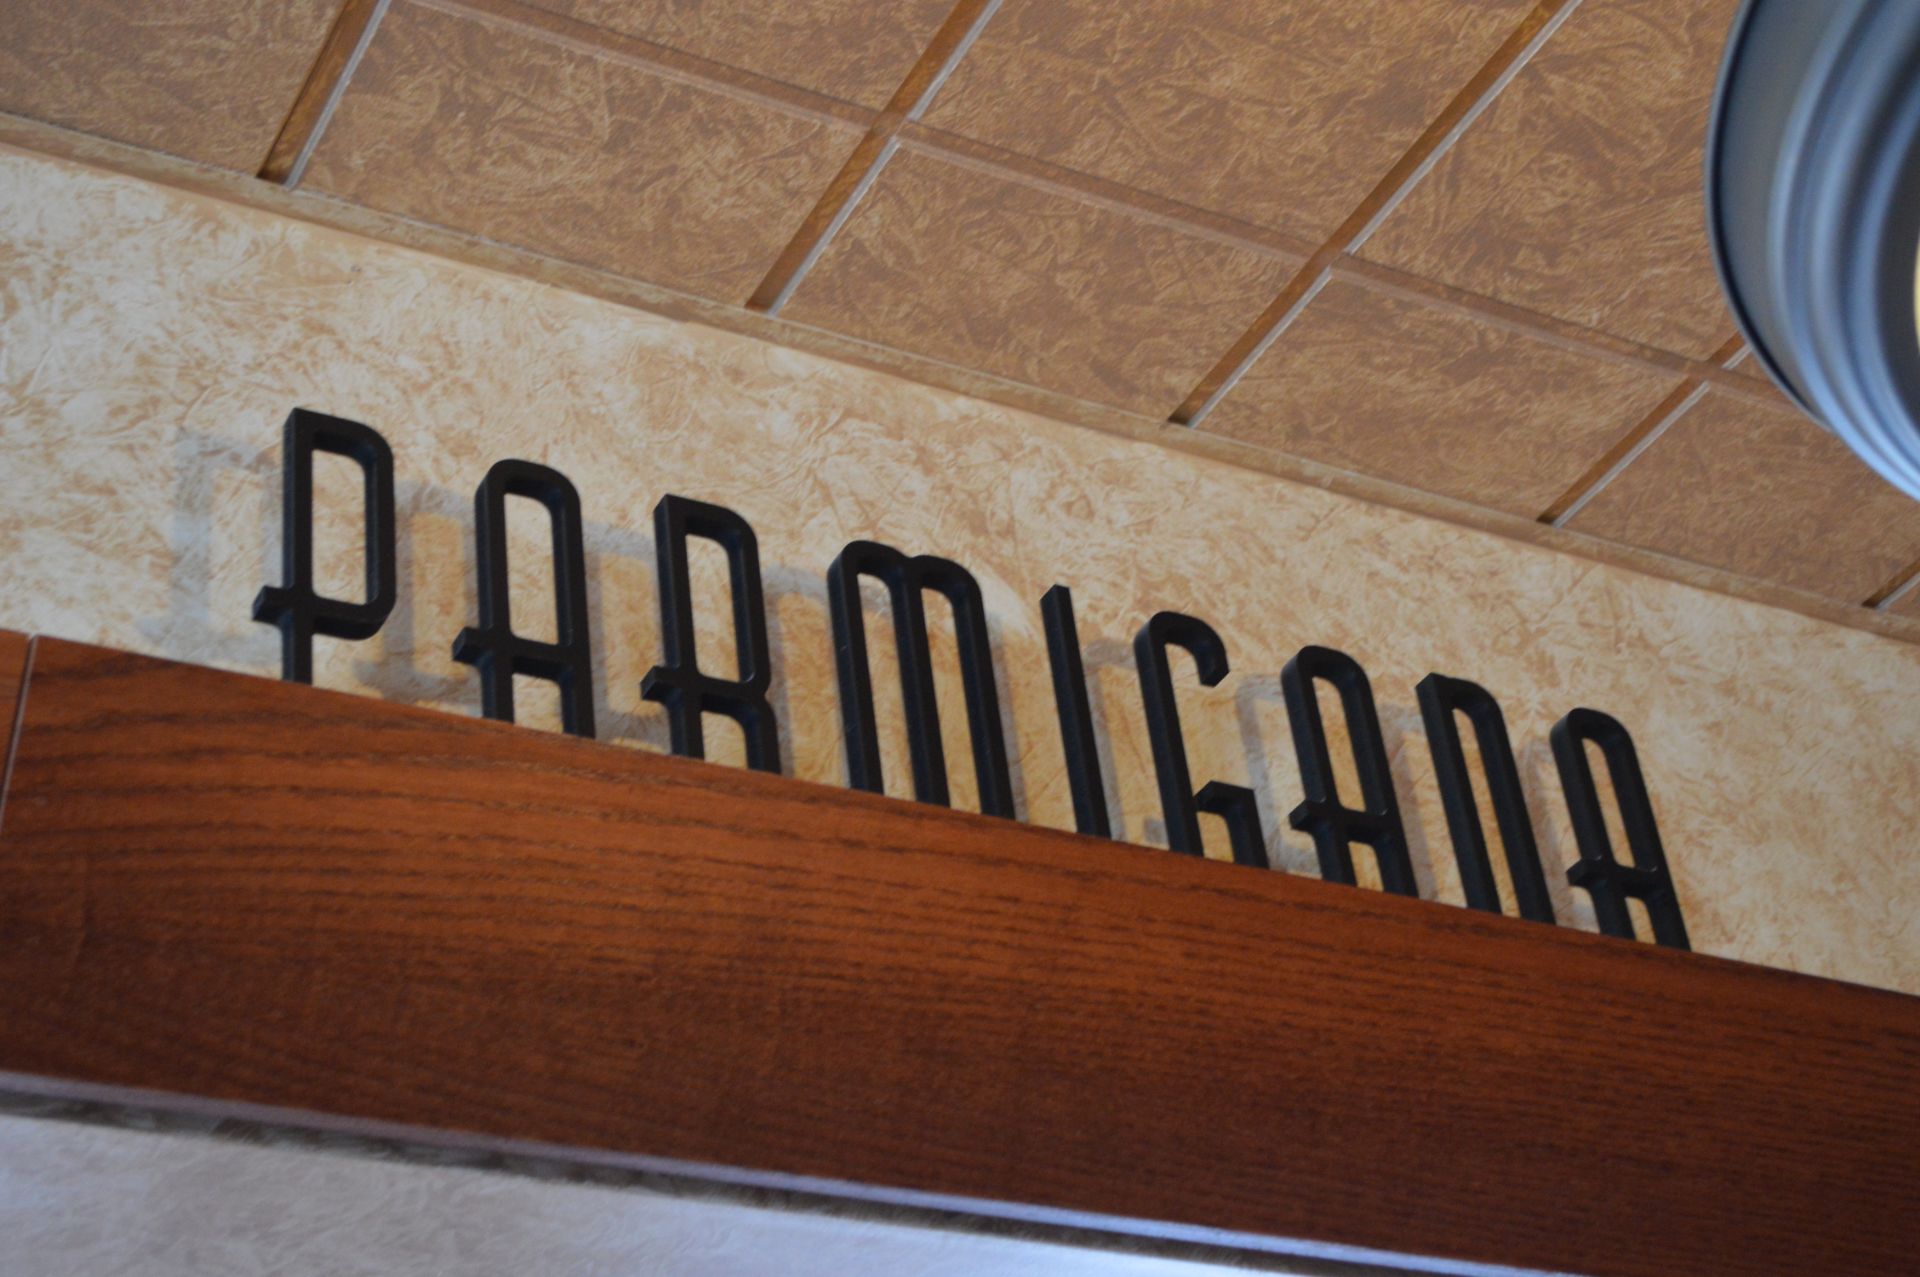 40 x Wooden Signs Suitable For Restaurants, Cafes, Bistros etc - Includes Grills, Amaretto, Penne, - Image 5 of 31